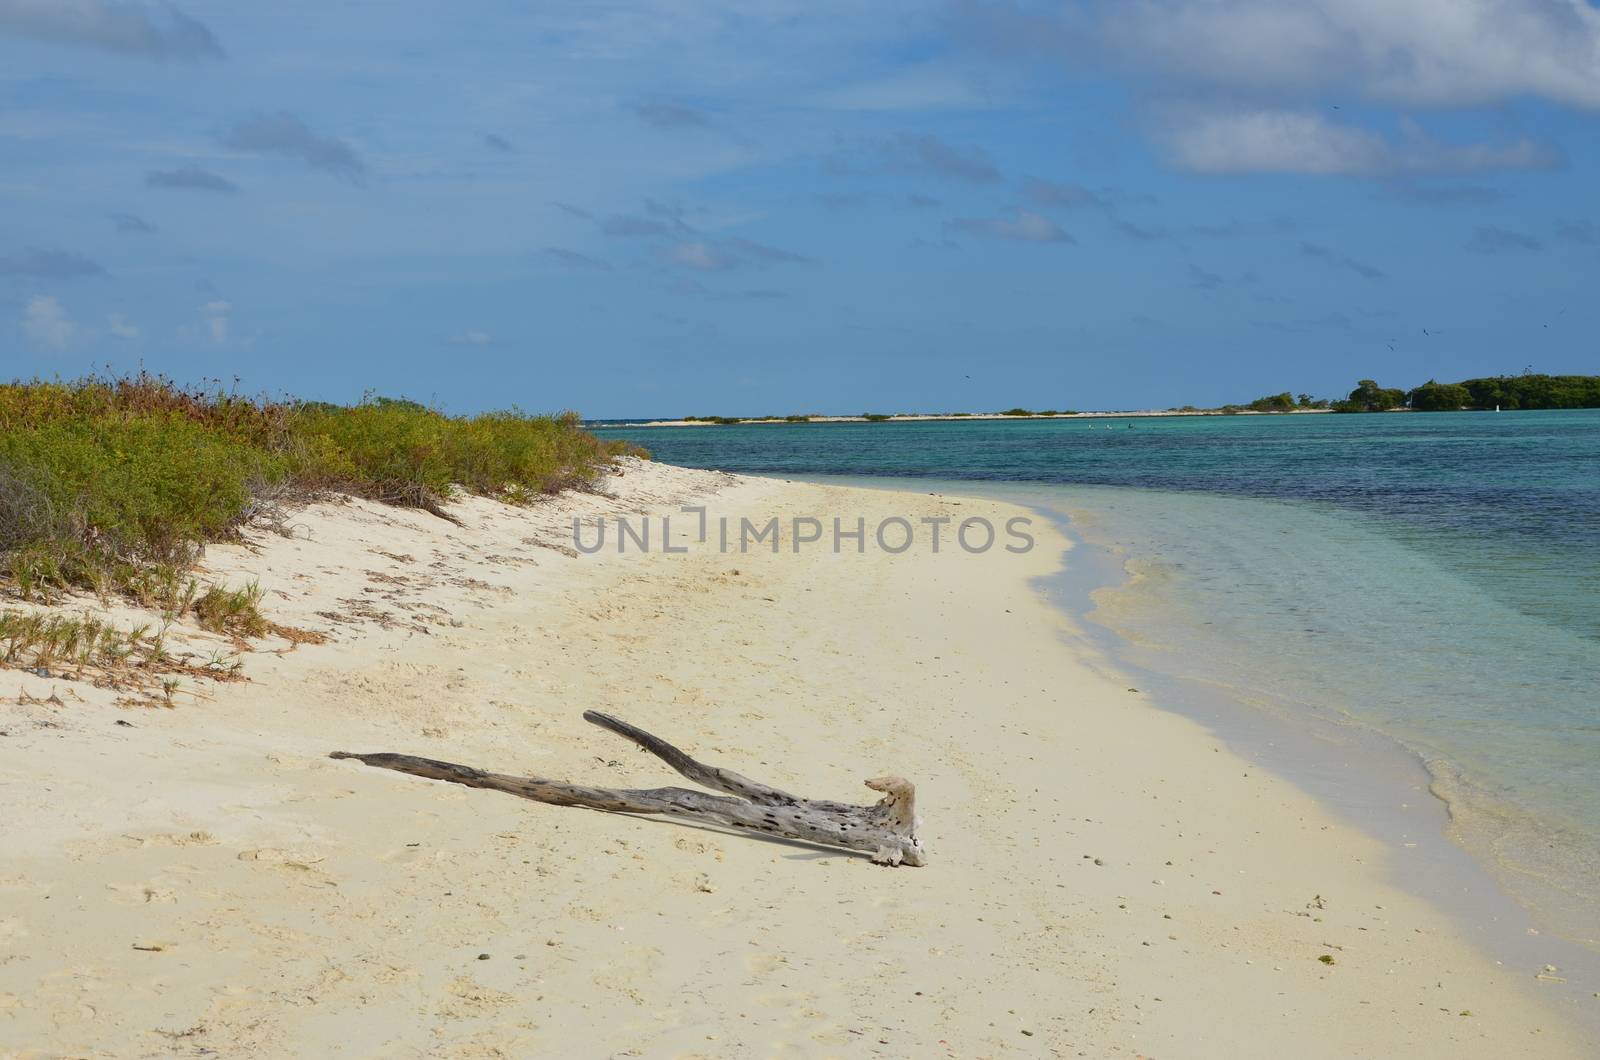 A remote beach on Dry Tortugas a small isalnd off the coast of florida.